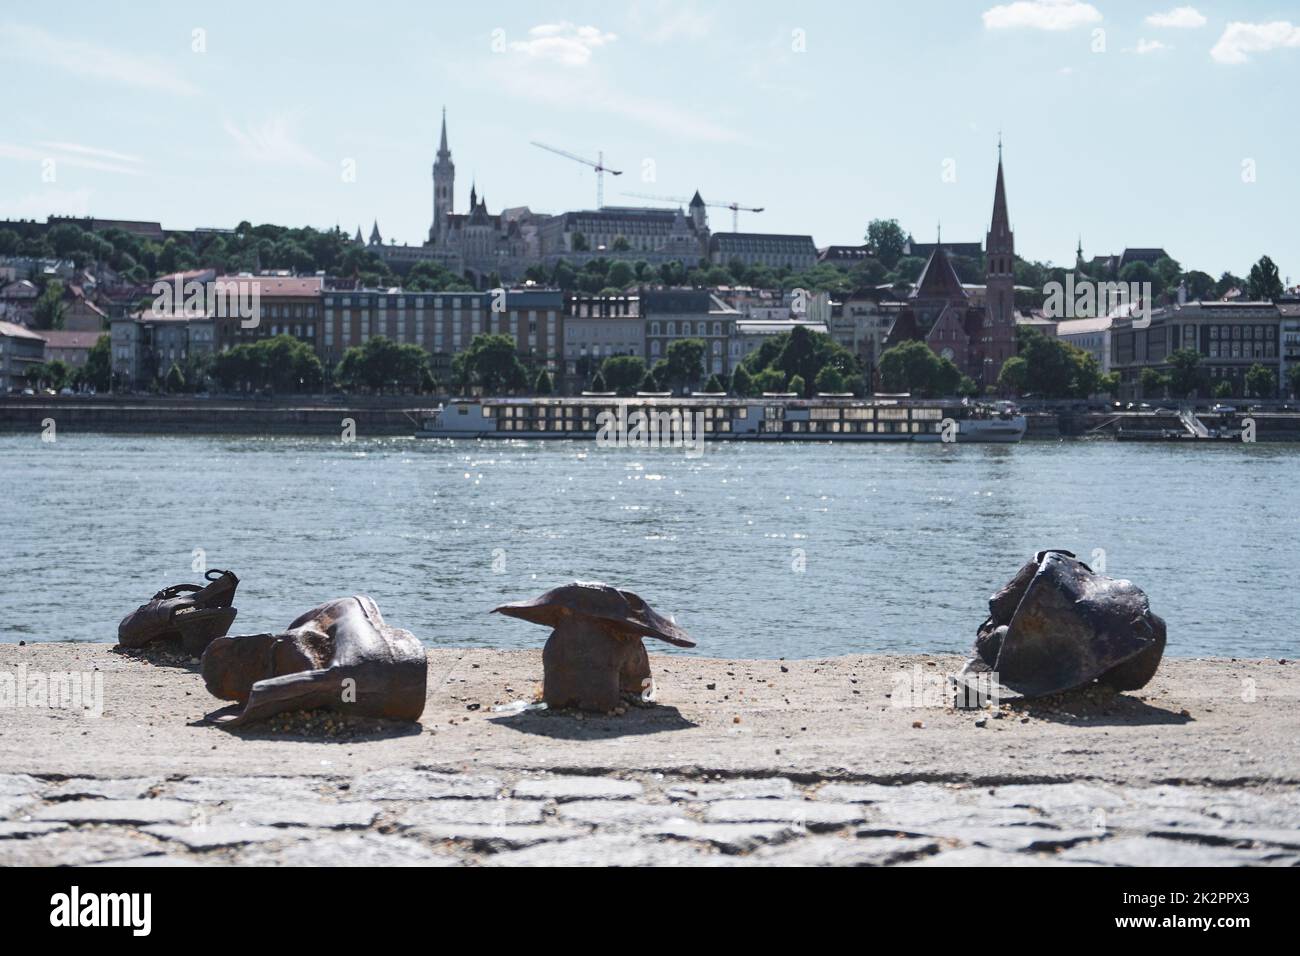 The iron shoes sculptures on the Danube river bank Stock Photo